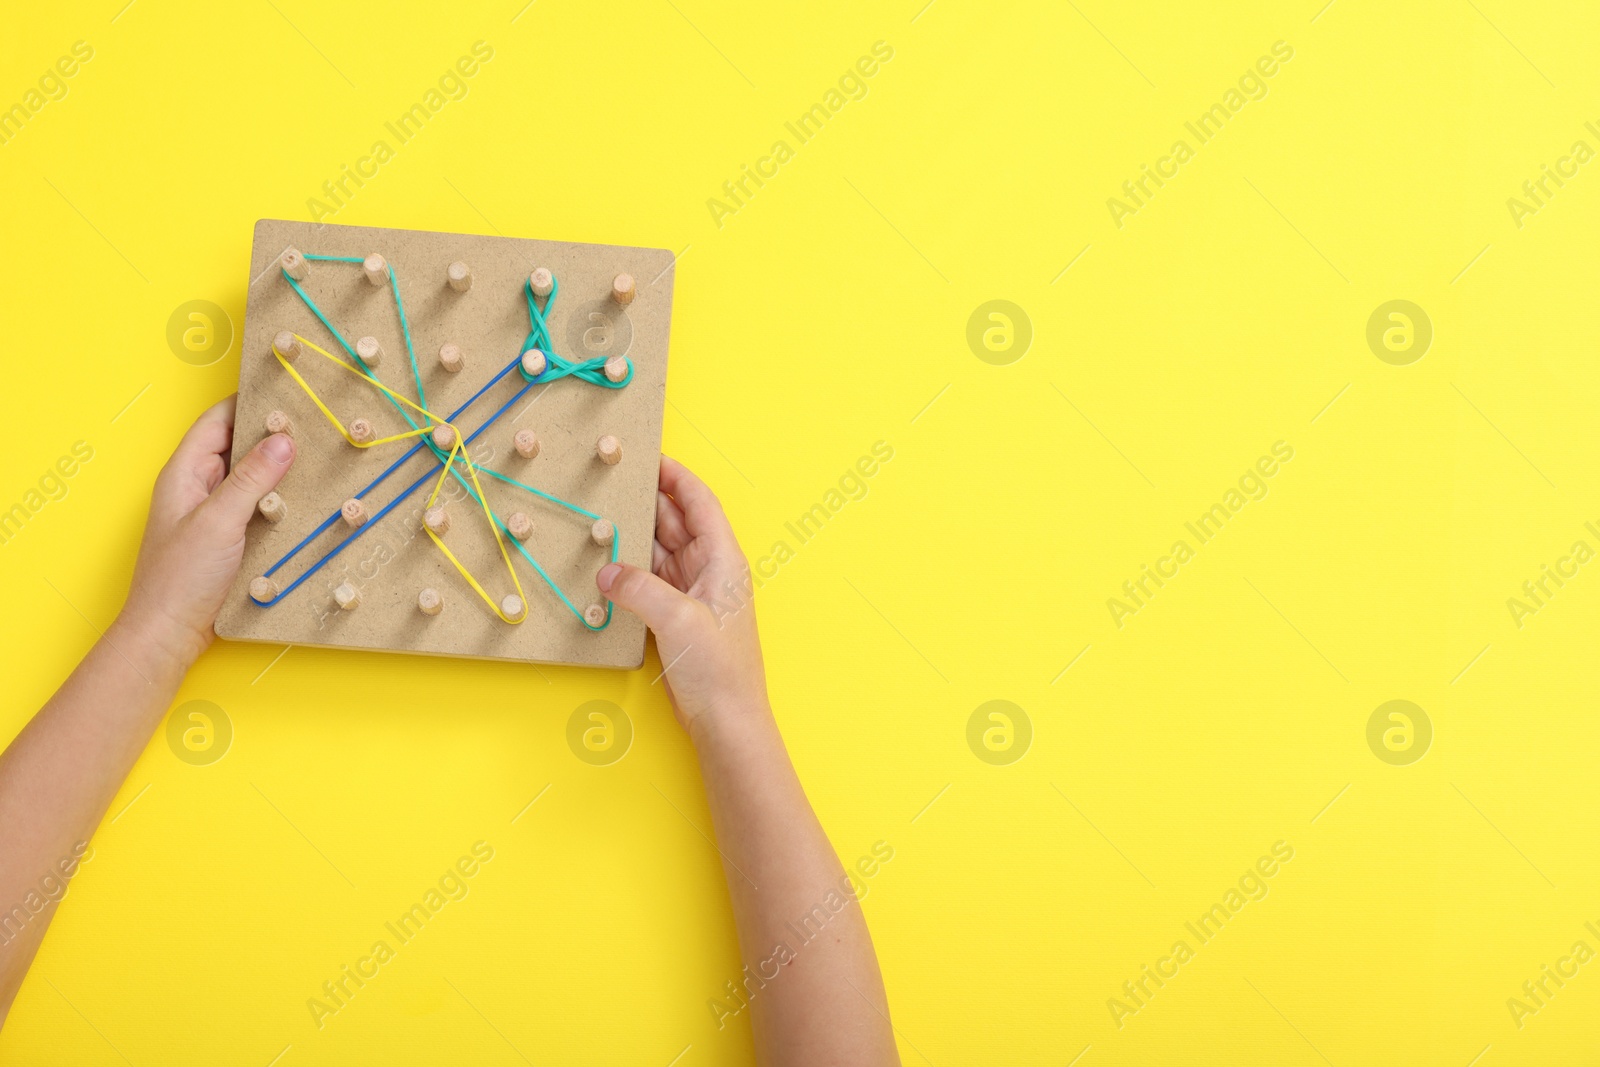 Photo of Motor skills development. Boy with geoboard and rubber bands at yellow table, top view. Space for text